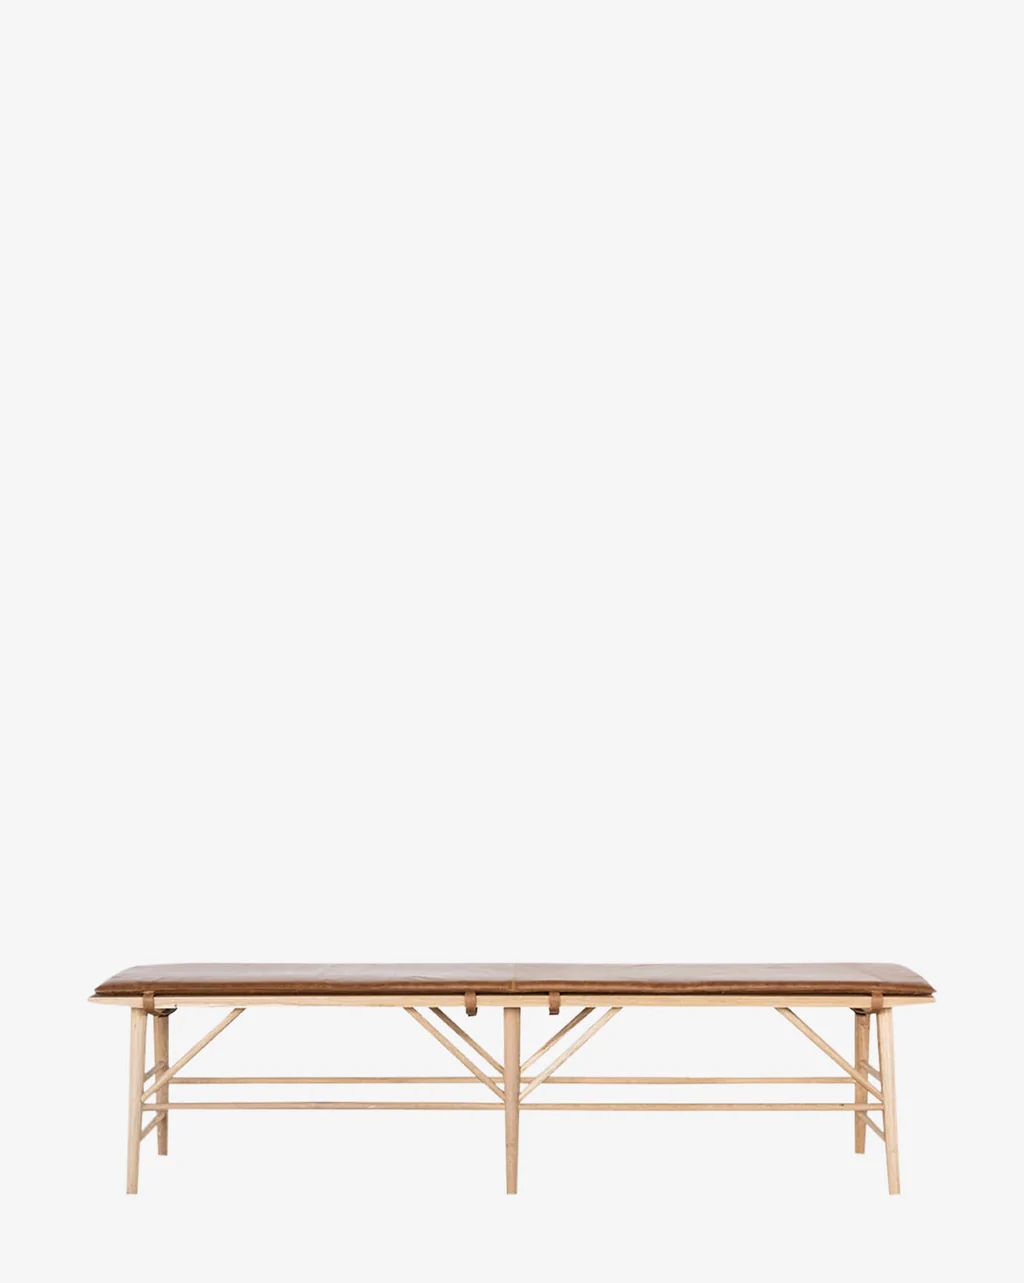 Beau Bench | McGee & Co.